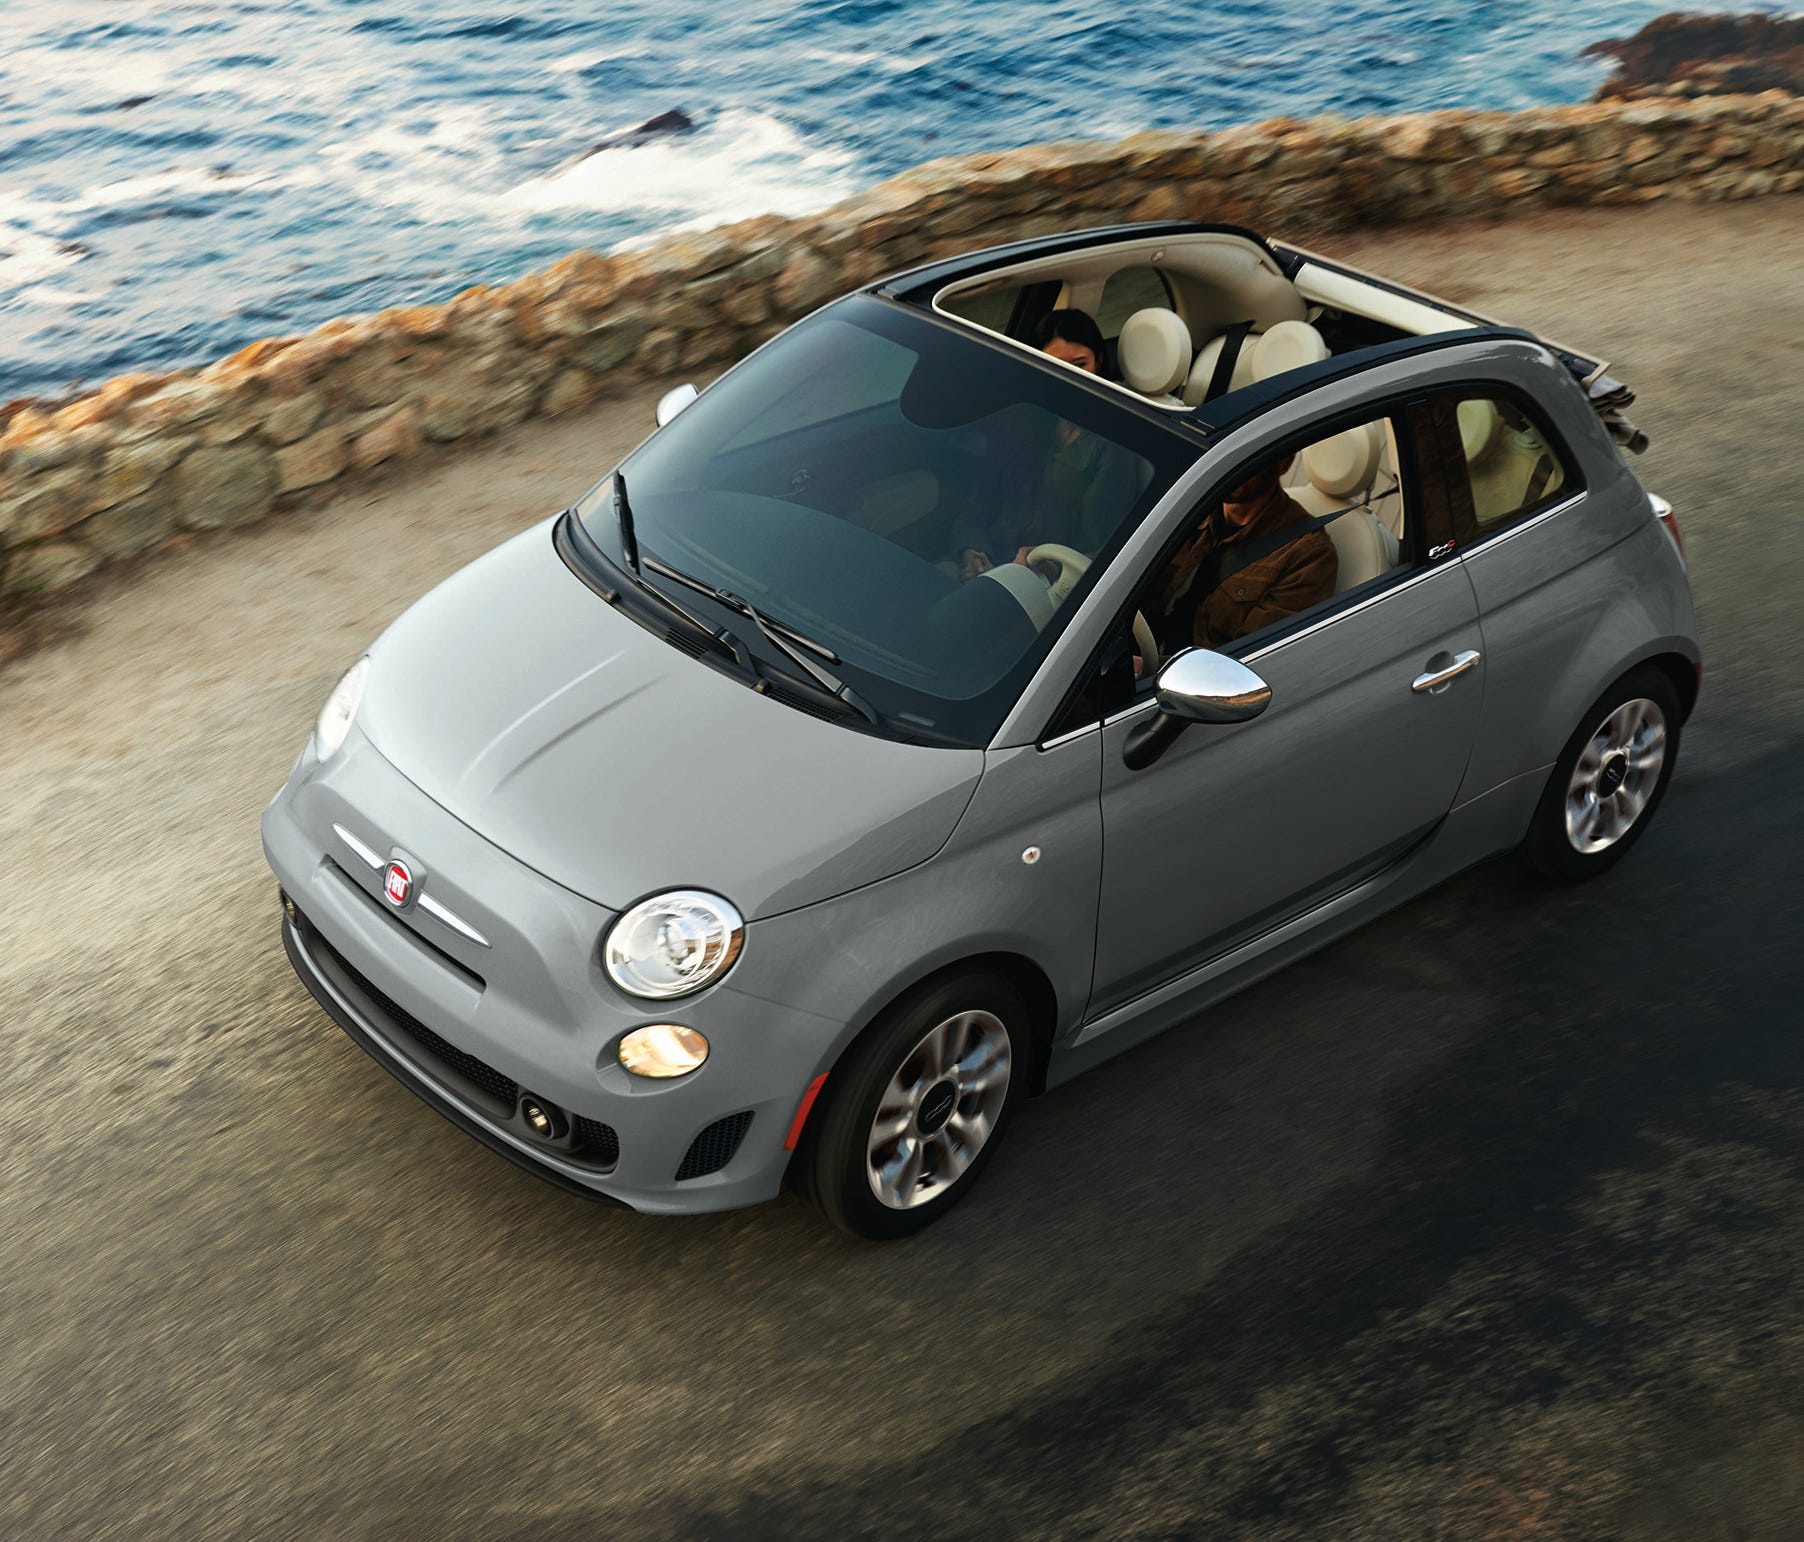 Fiat  placed last among brands in the Consumer Reports' survey. This is the 500c